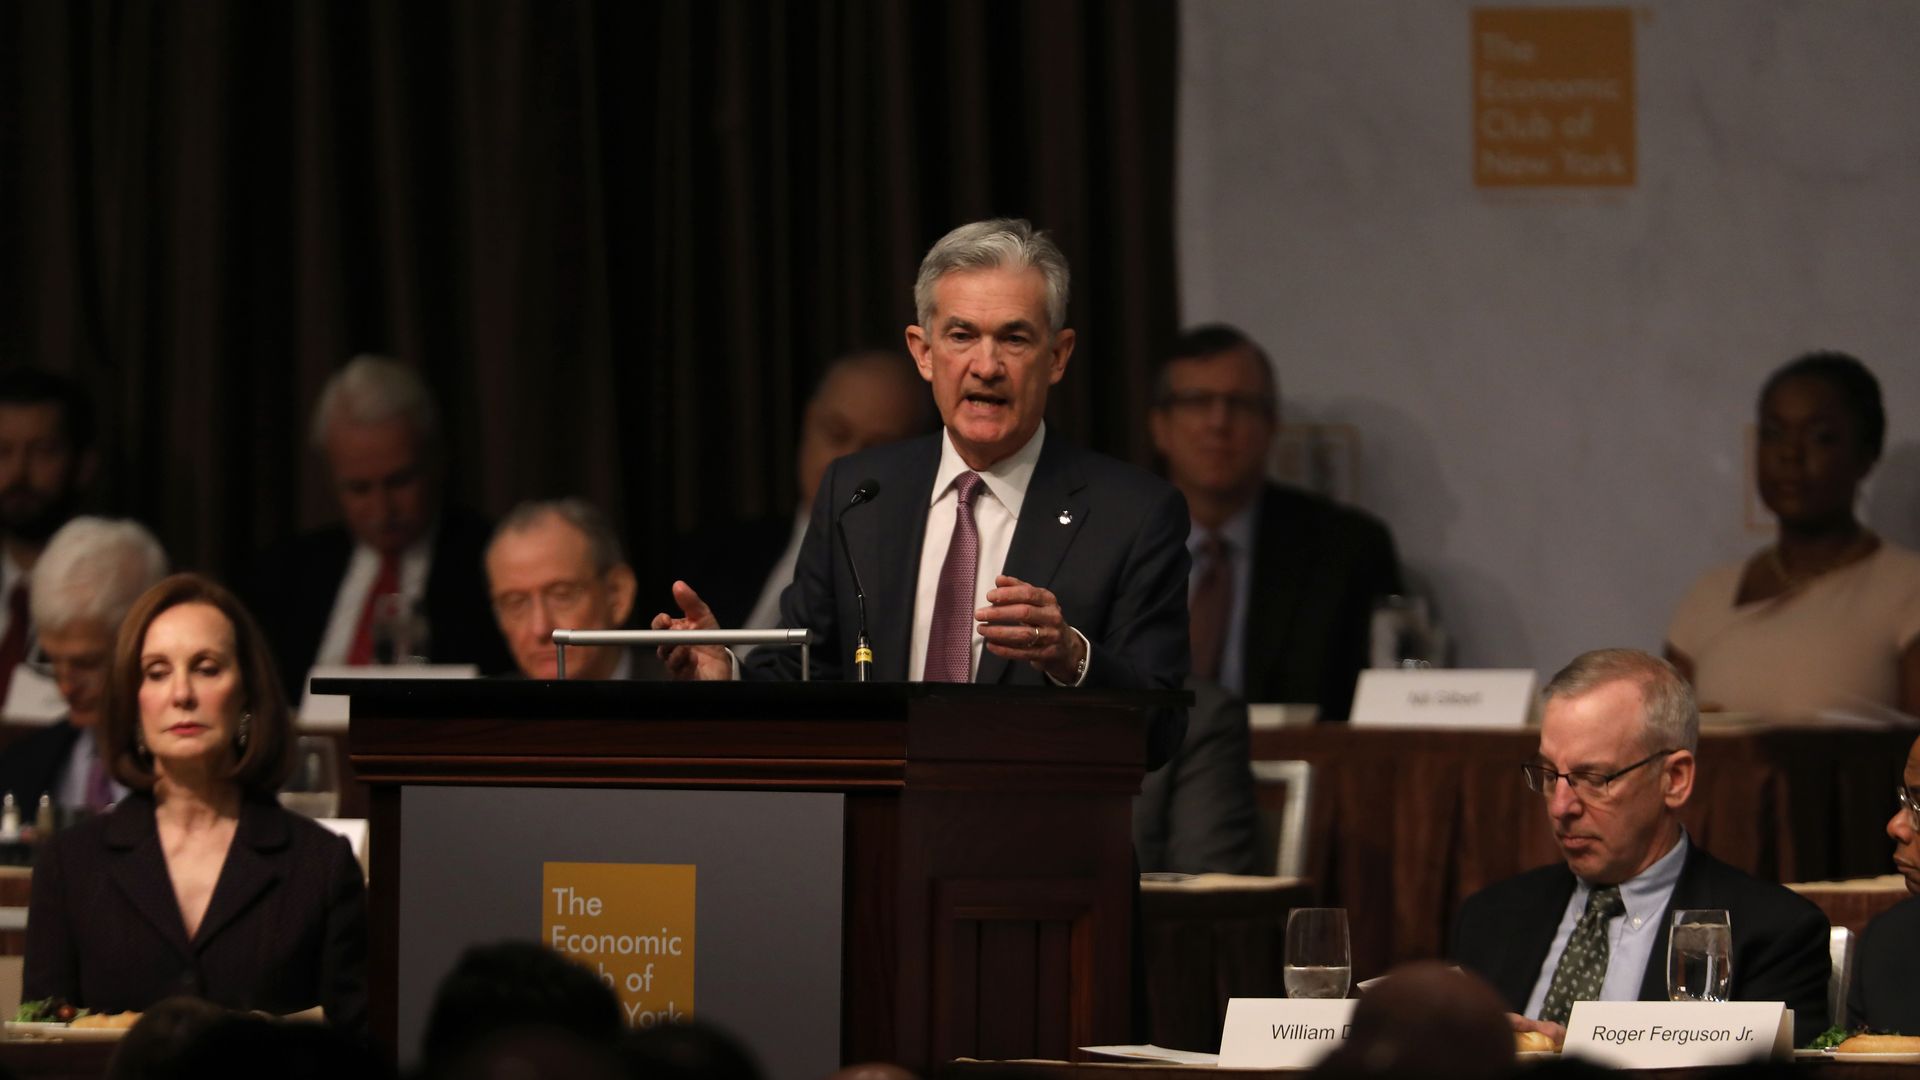 NEW YORK, NEW YORK - NOVEMBER 28: Federal Reserve Chairman Jerome Powell speaks at the Economic Club of New York on November 28, 2018 in New York City. 